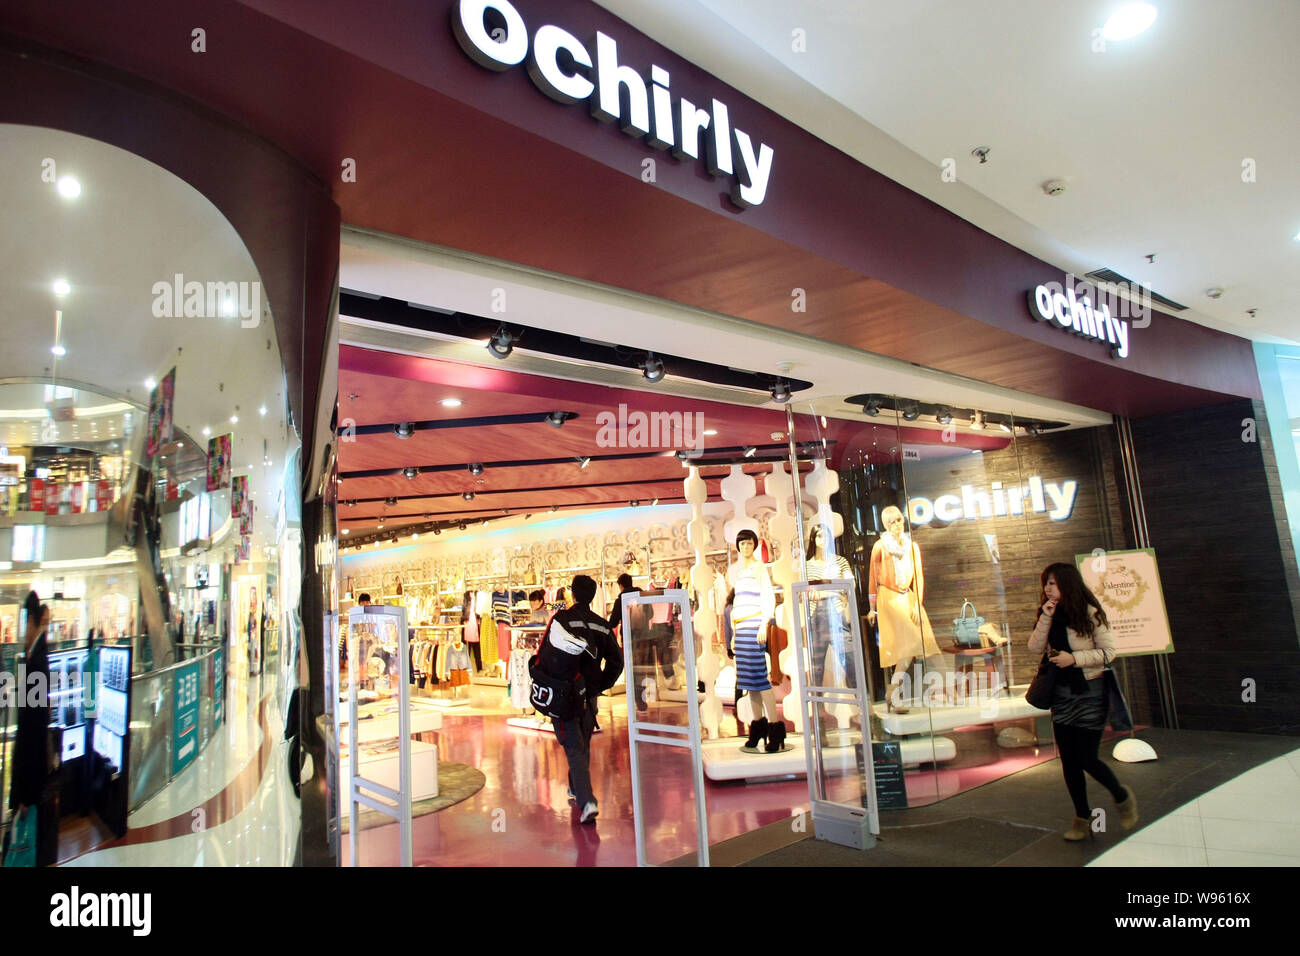 View of an Ochirly store in Shanghai, China, 13 February 2012. A